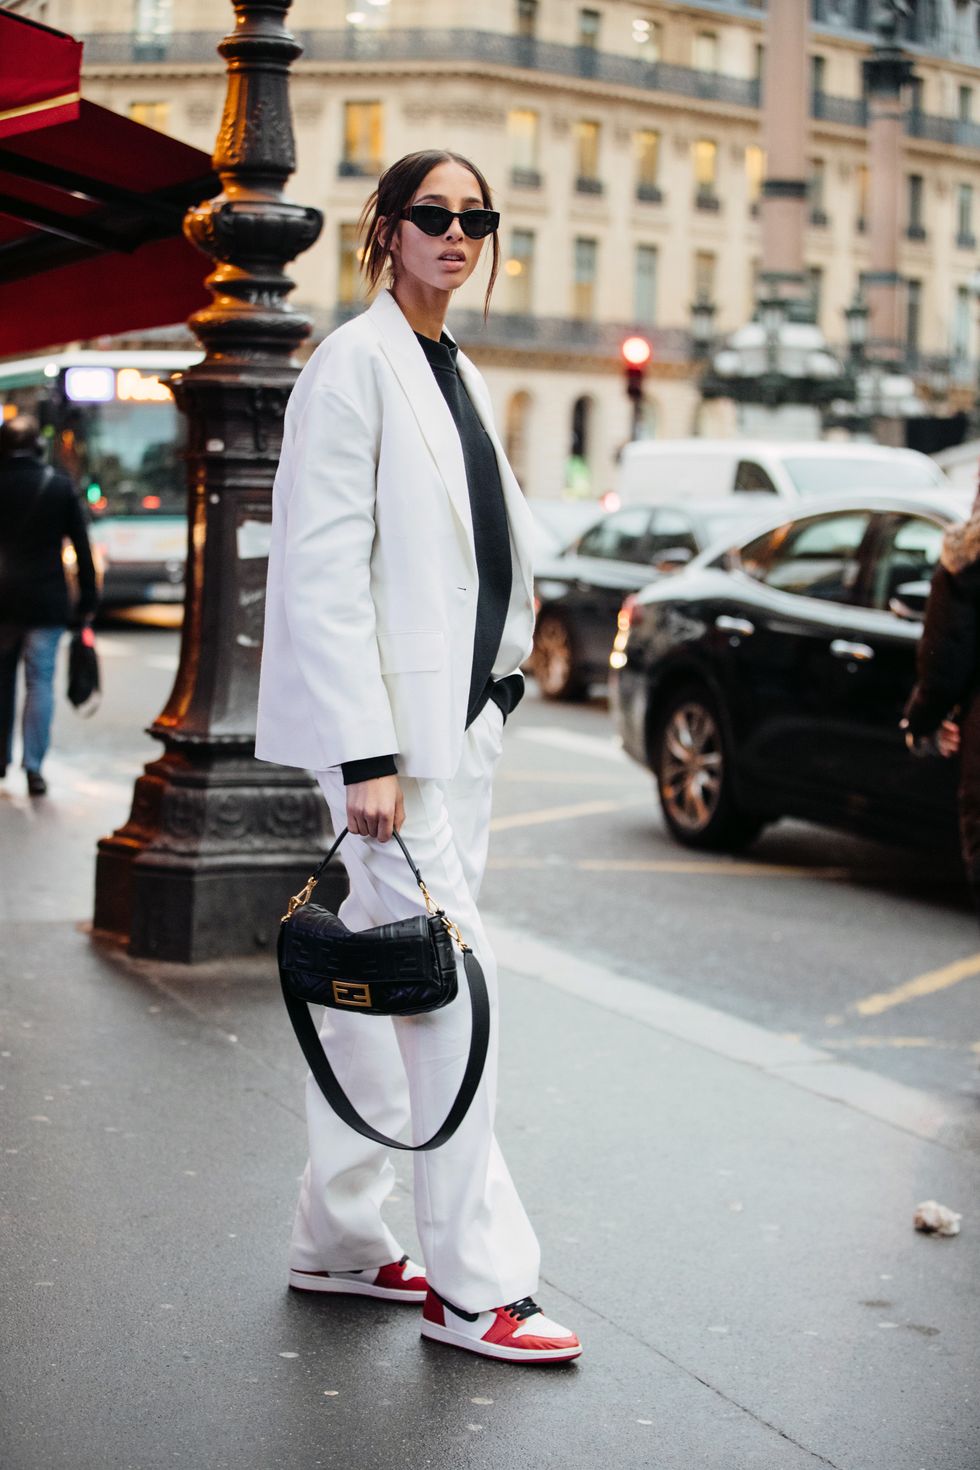 paris, france   february 28 model yasmin wijnaldum wears black sunglasses, a white matching suit jacket and pants, black top, black leather fendi baguette bag, and red and white nike jordan sneakers after the redemption show during paris fashion week fallwinter 2020 on february 28, 2020 in paris, france photo by melodie jenggetty images